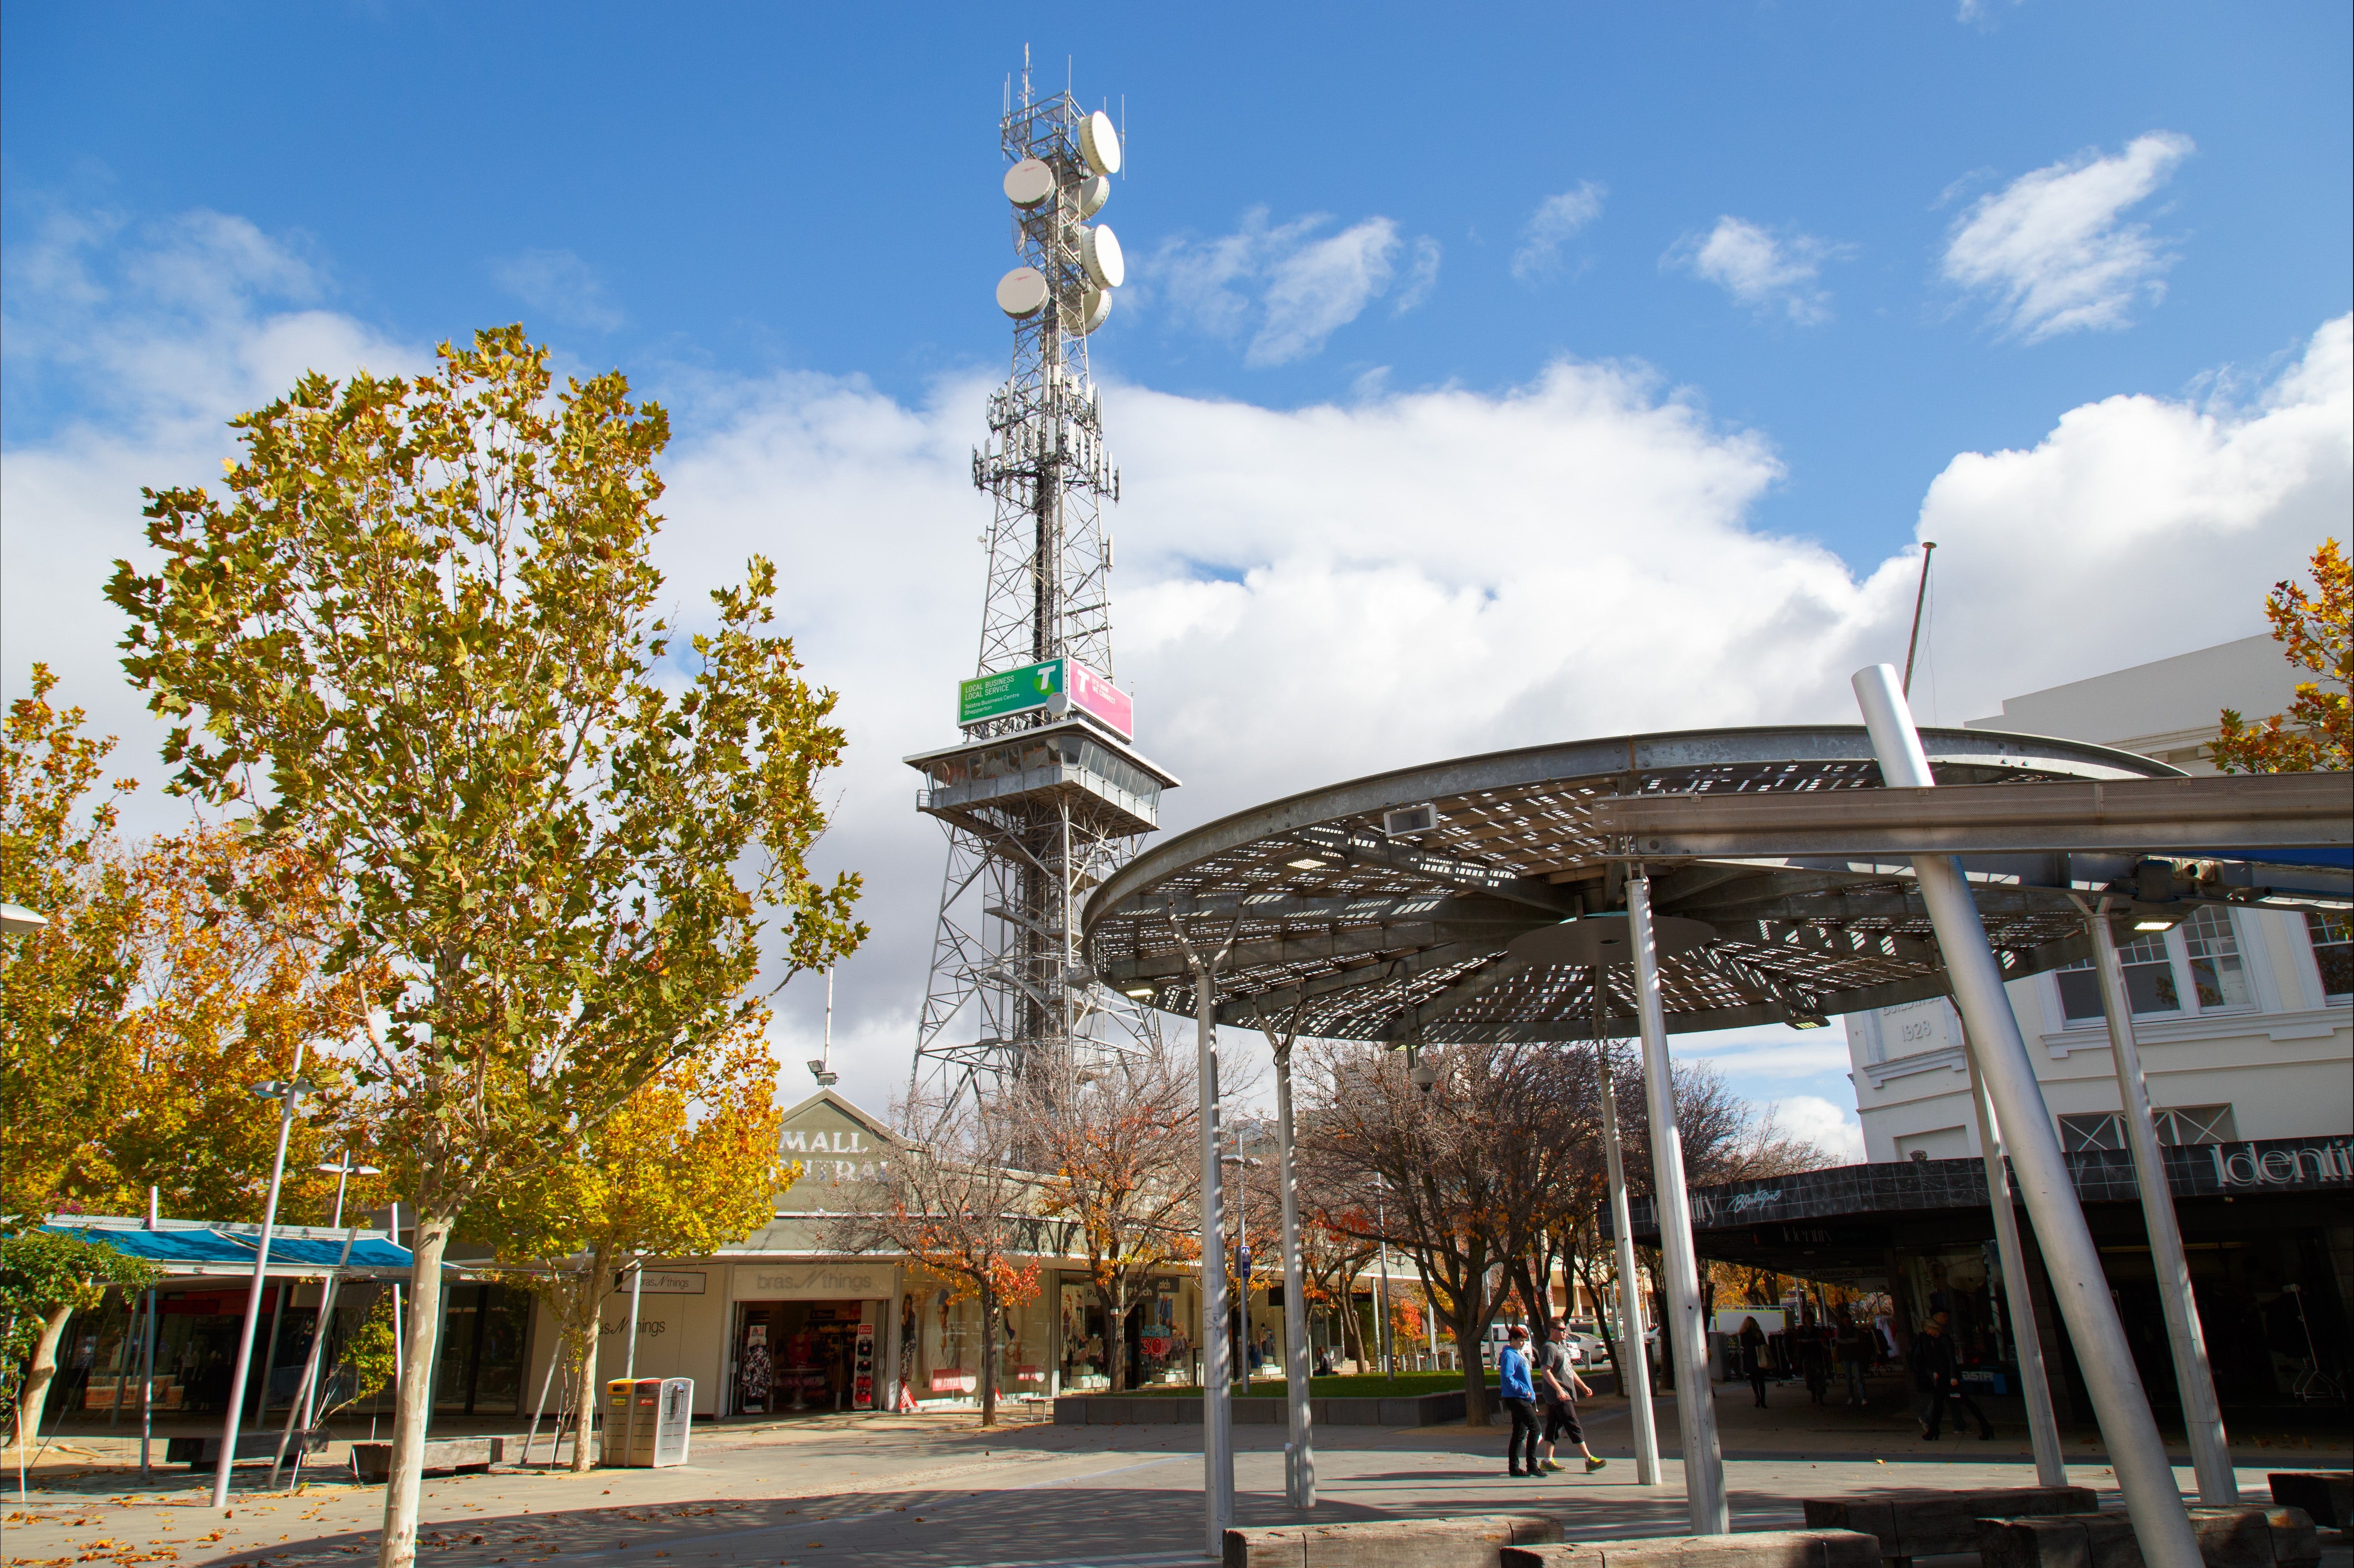 Shepparton Tower - Find Attractions